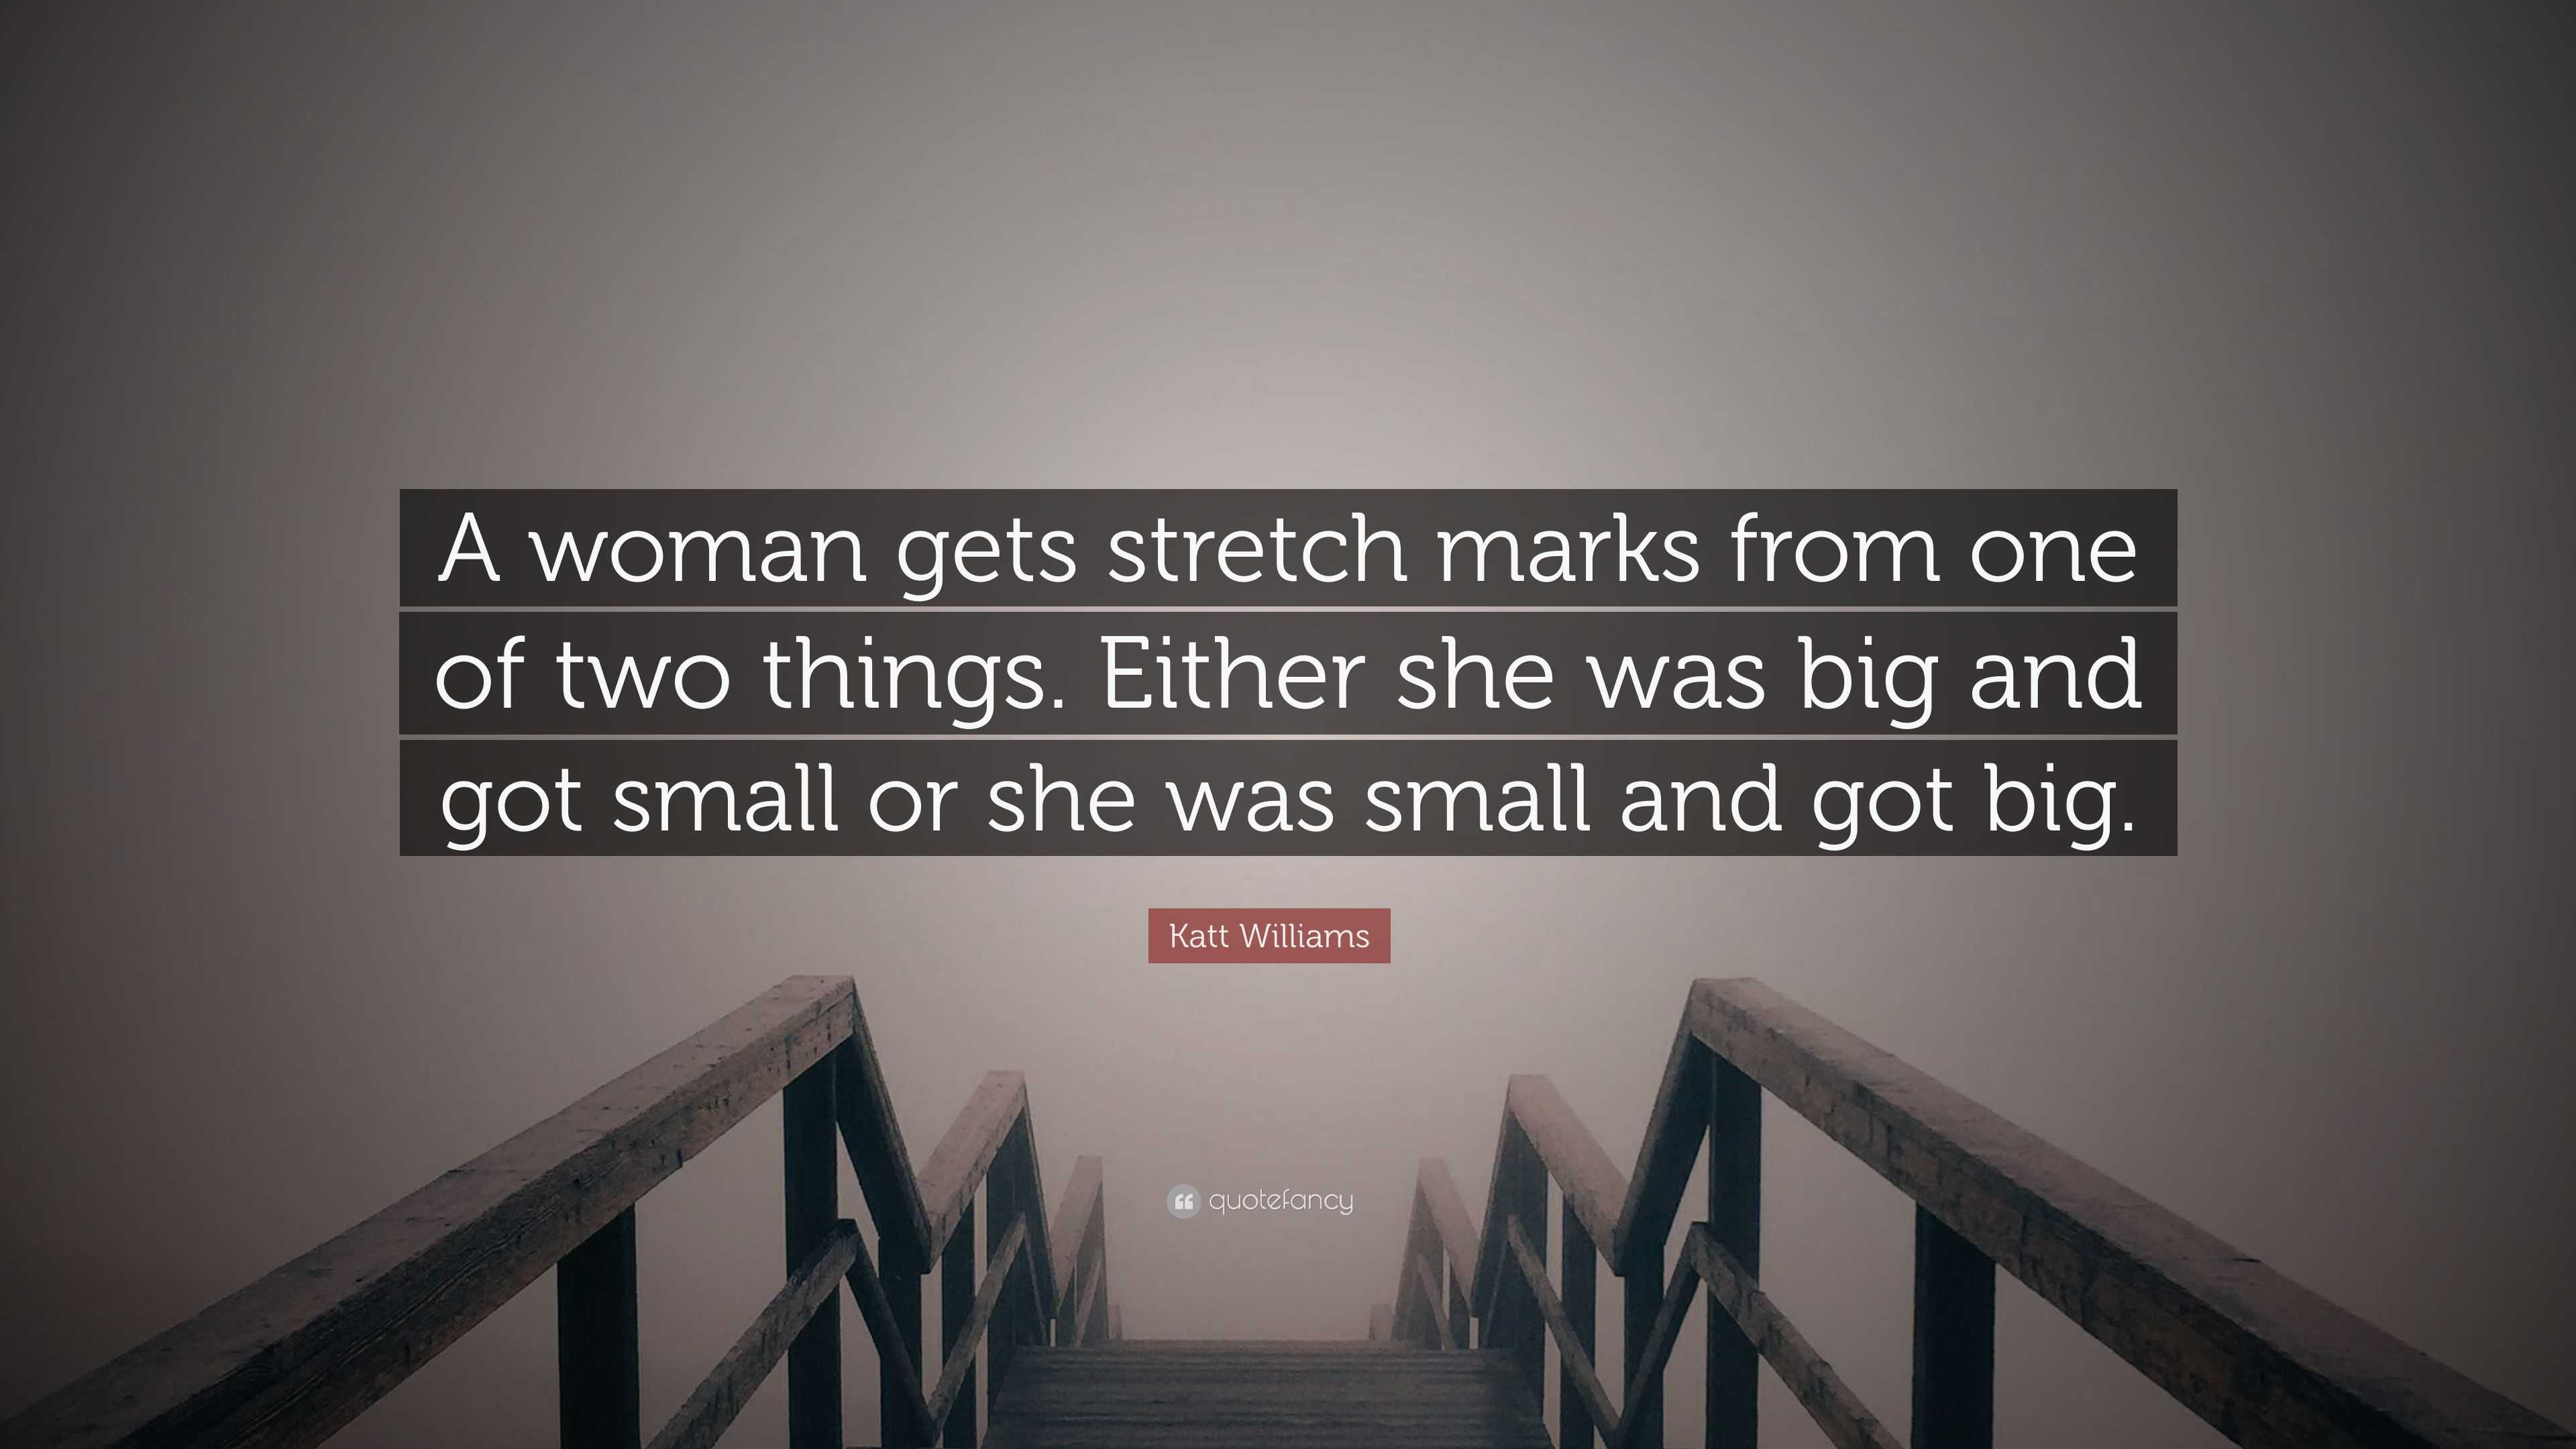 mundstykke ketcher psykologisk Katt Williams Quote: “A woman gets stretch marks from one of two things.  Either she was